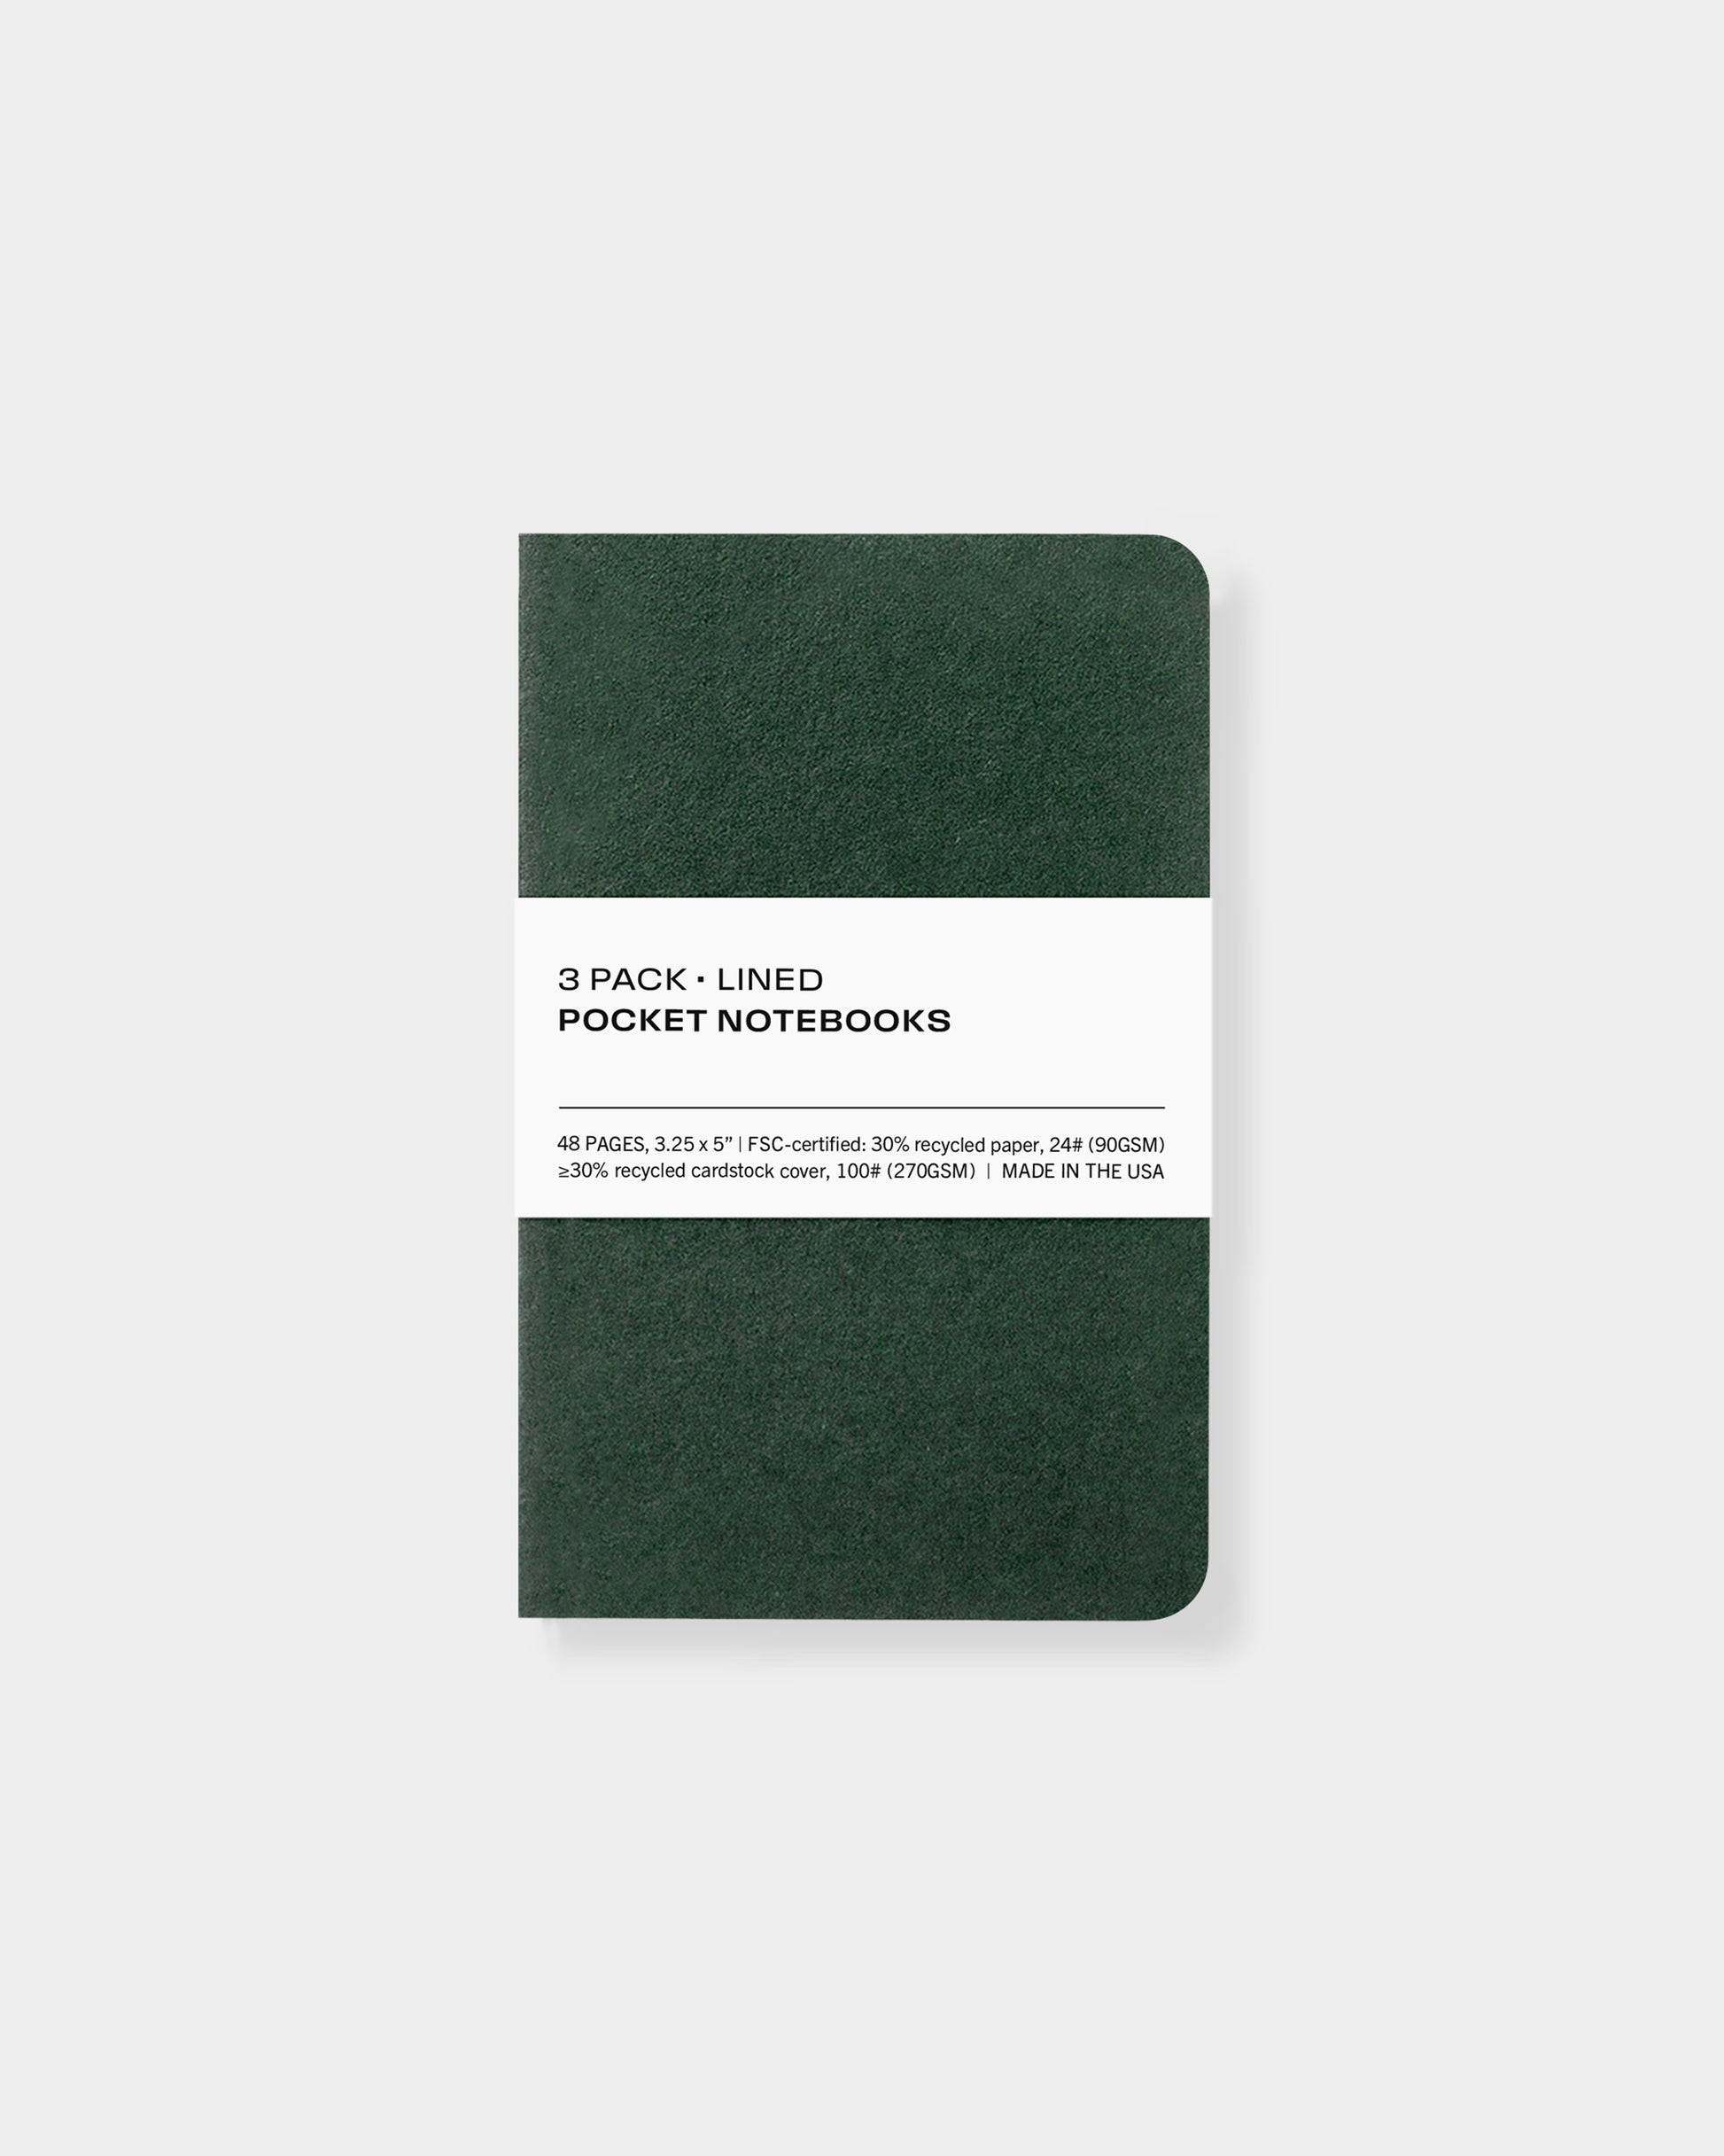 3 pack pocket notebooks, 3.25 x 5", made with eco-friendly papers. Lined paper pages, evergreen color way.